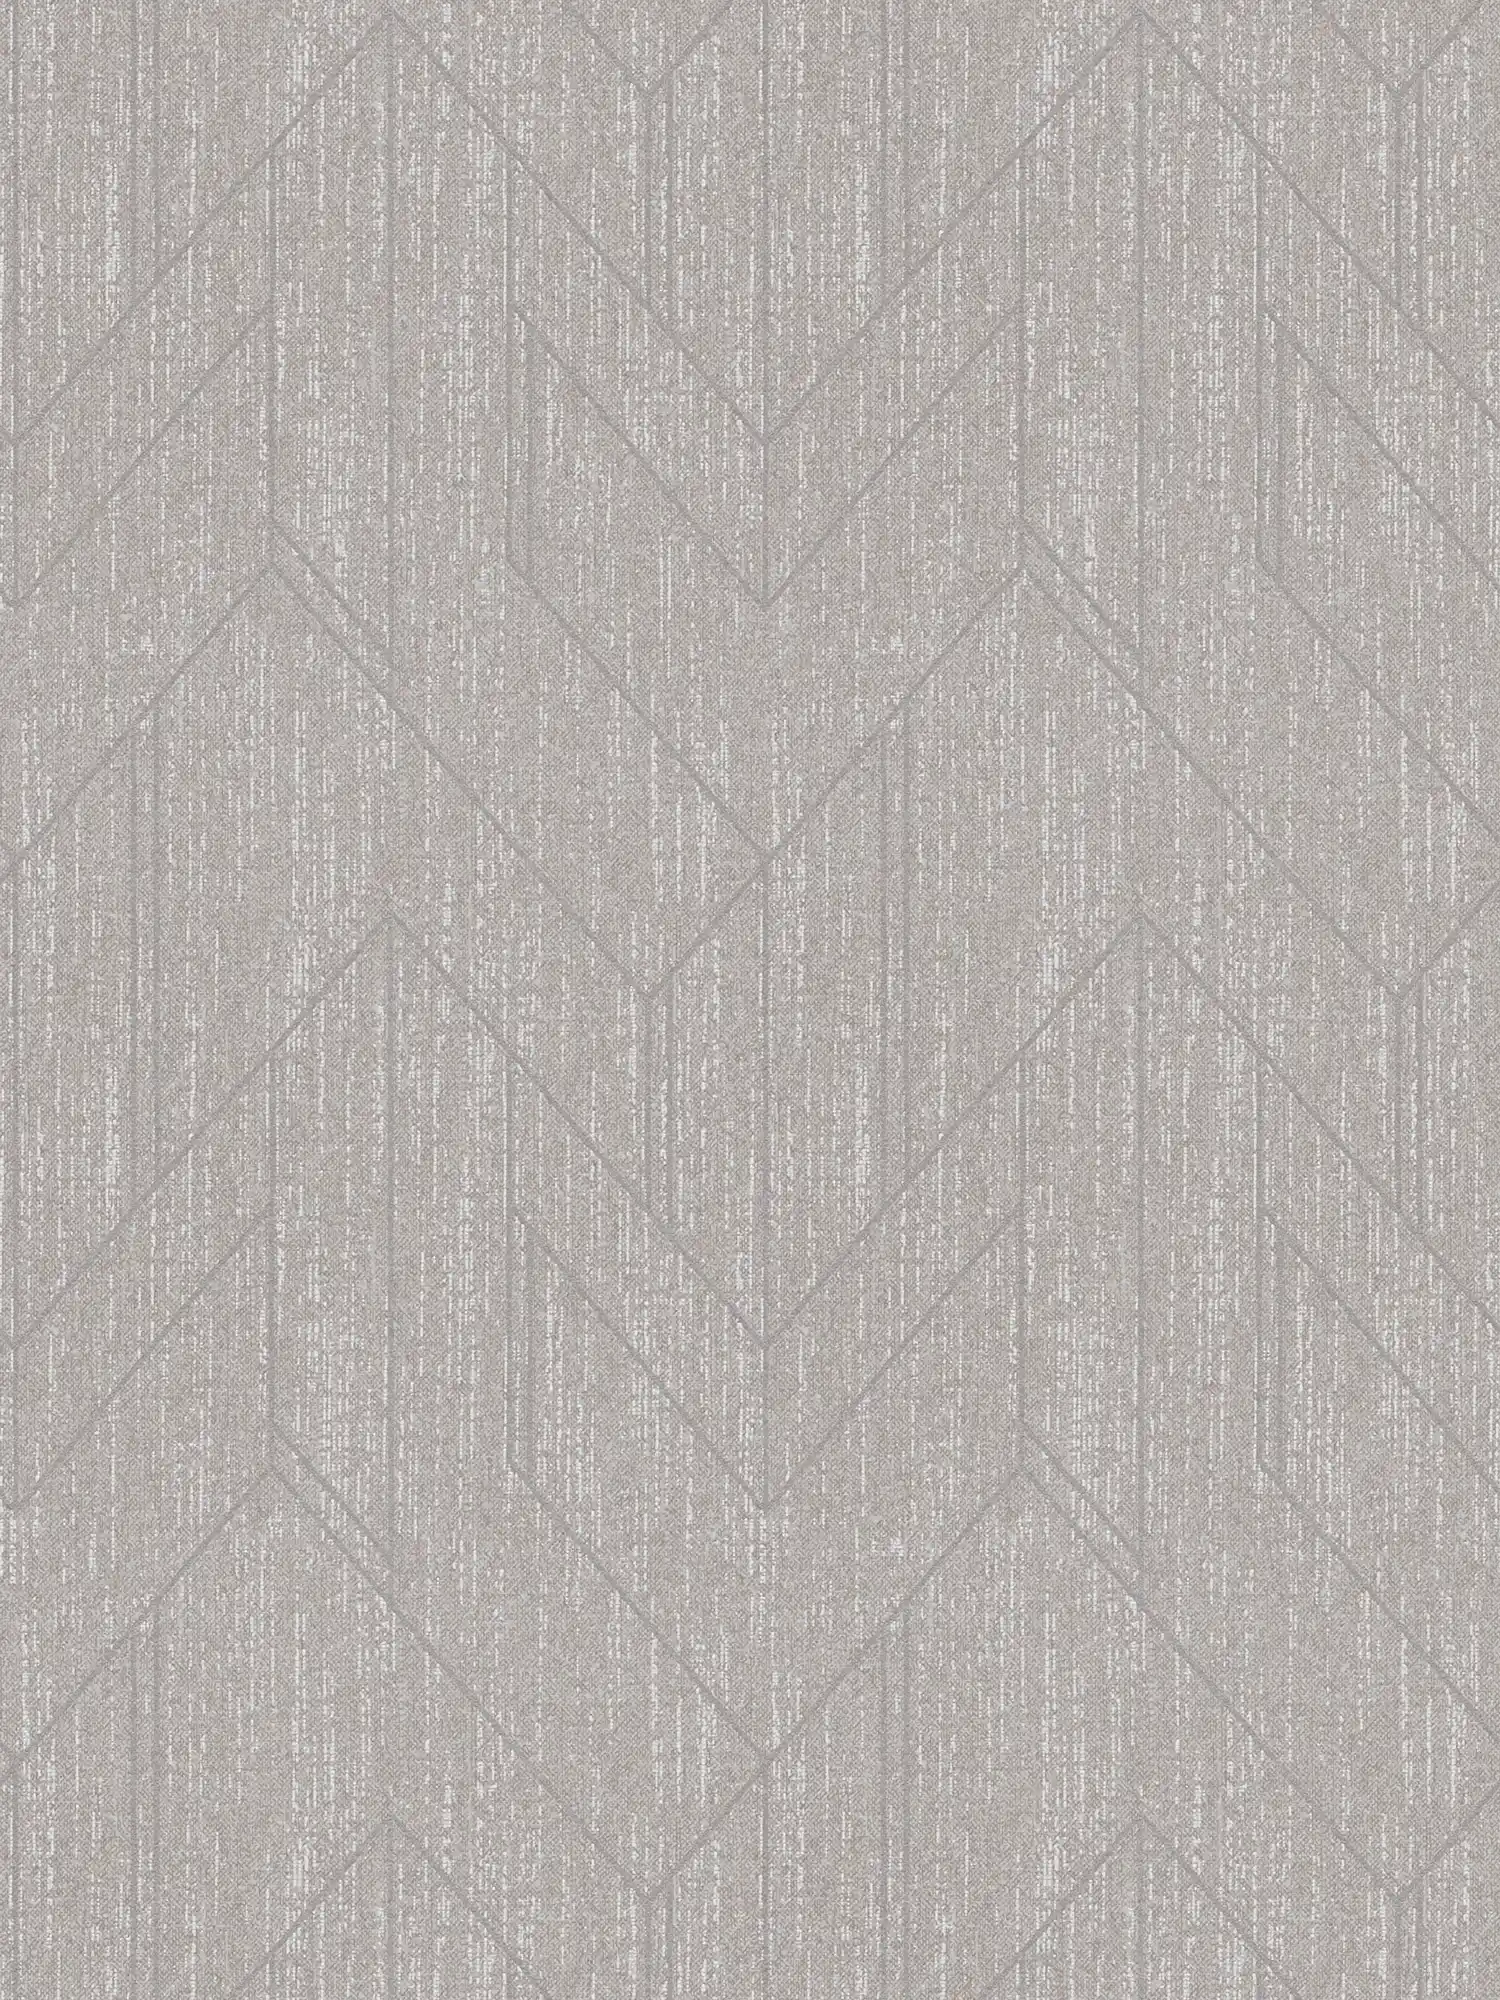 Textile optics wallpaper with structure design & silver pattern - grey
